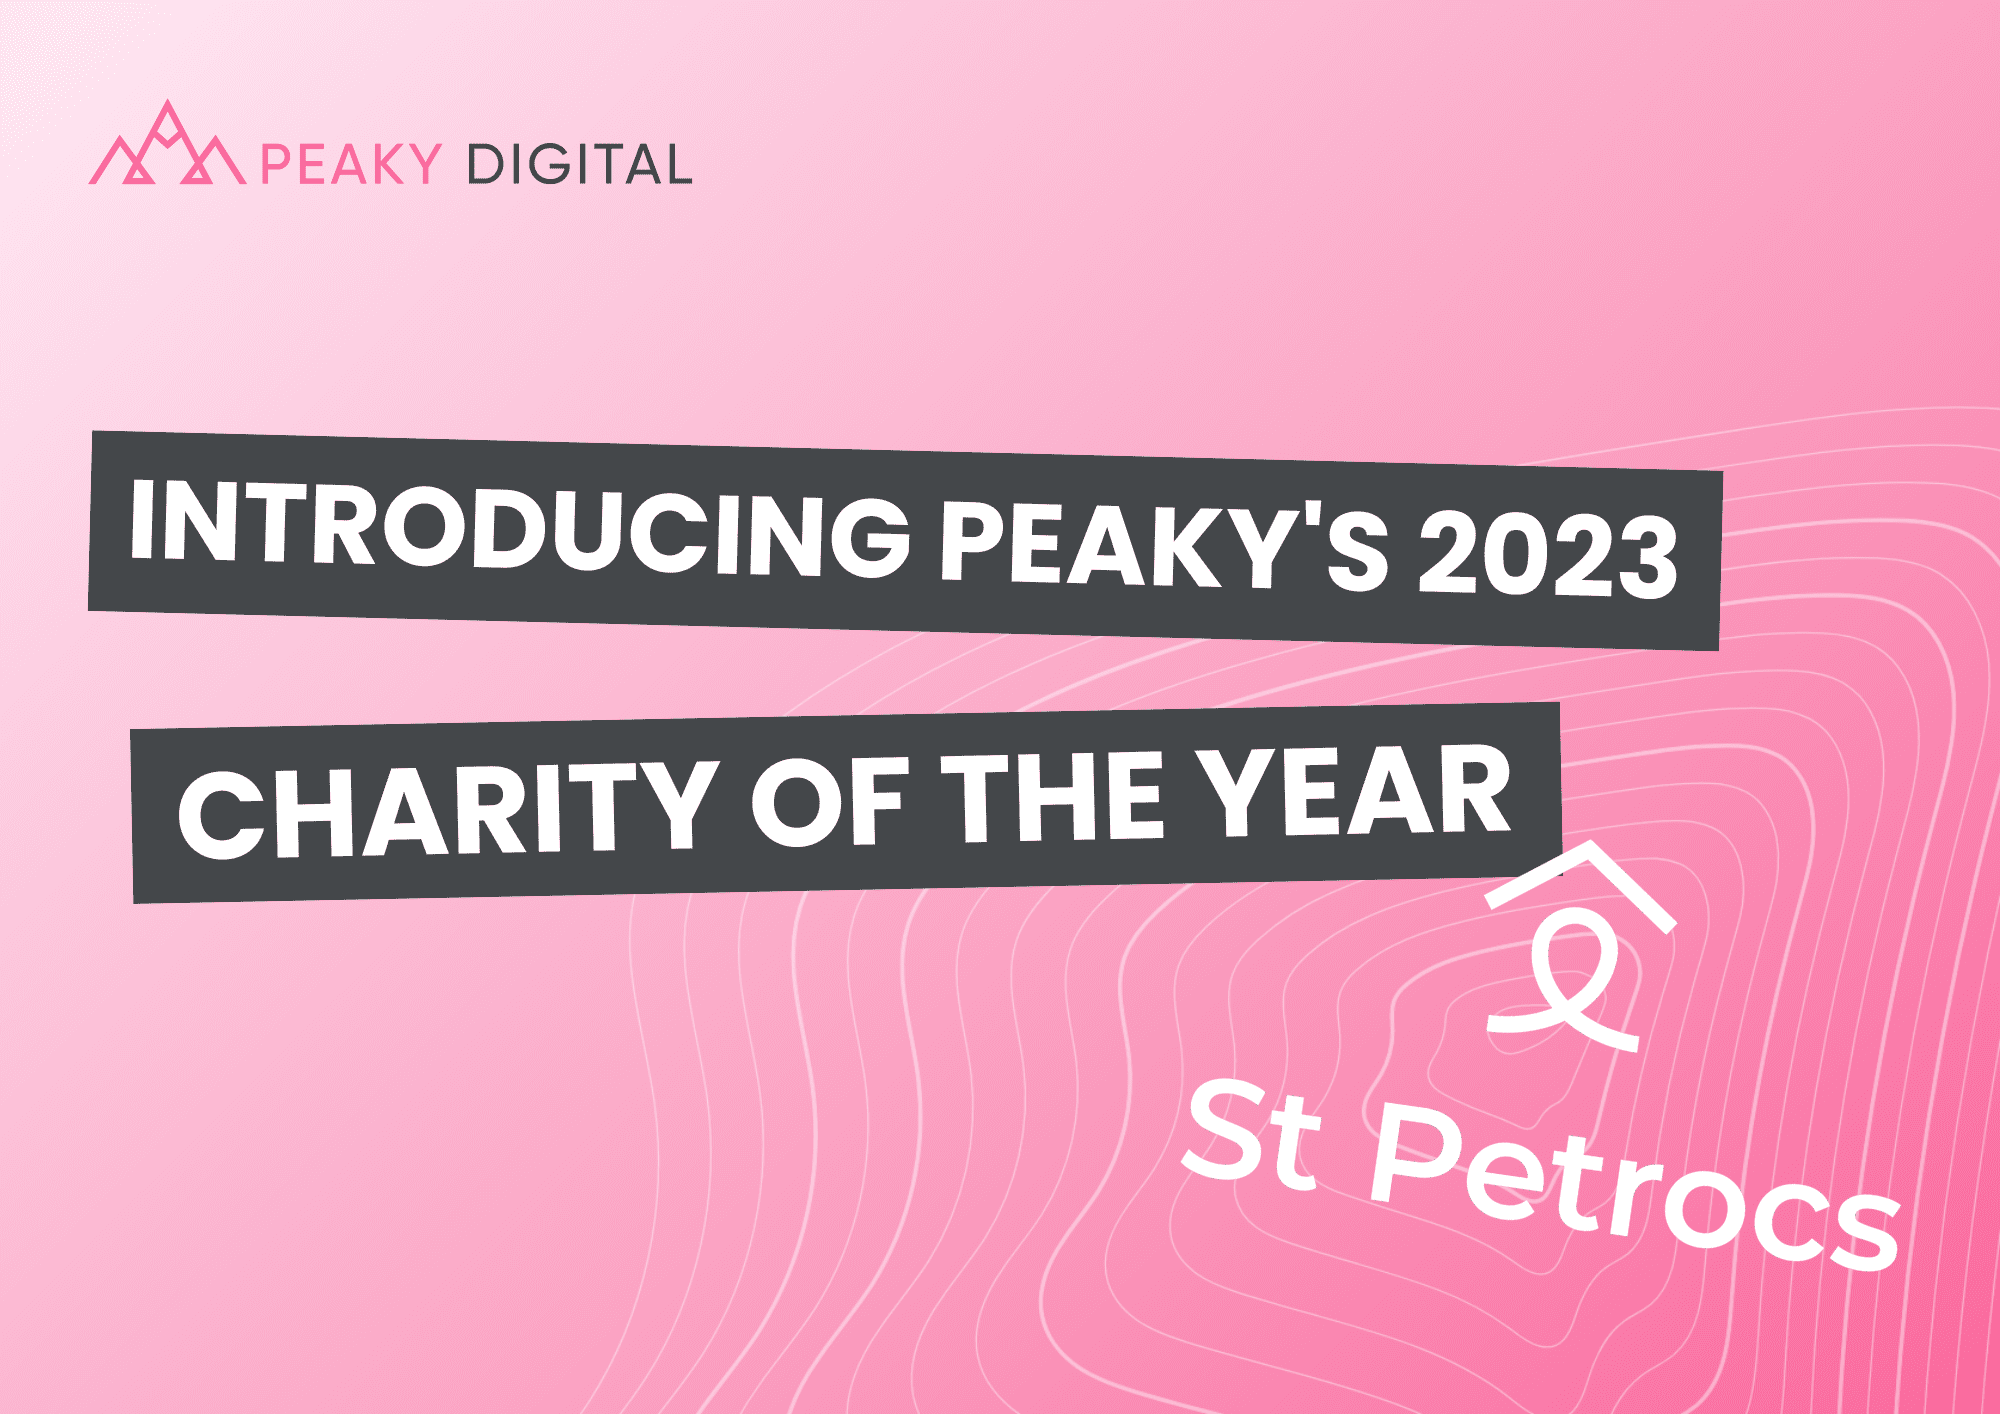 Introducing Peaky's 2023 Charity of the Year